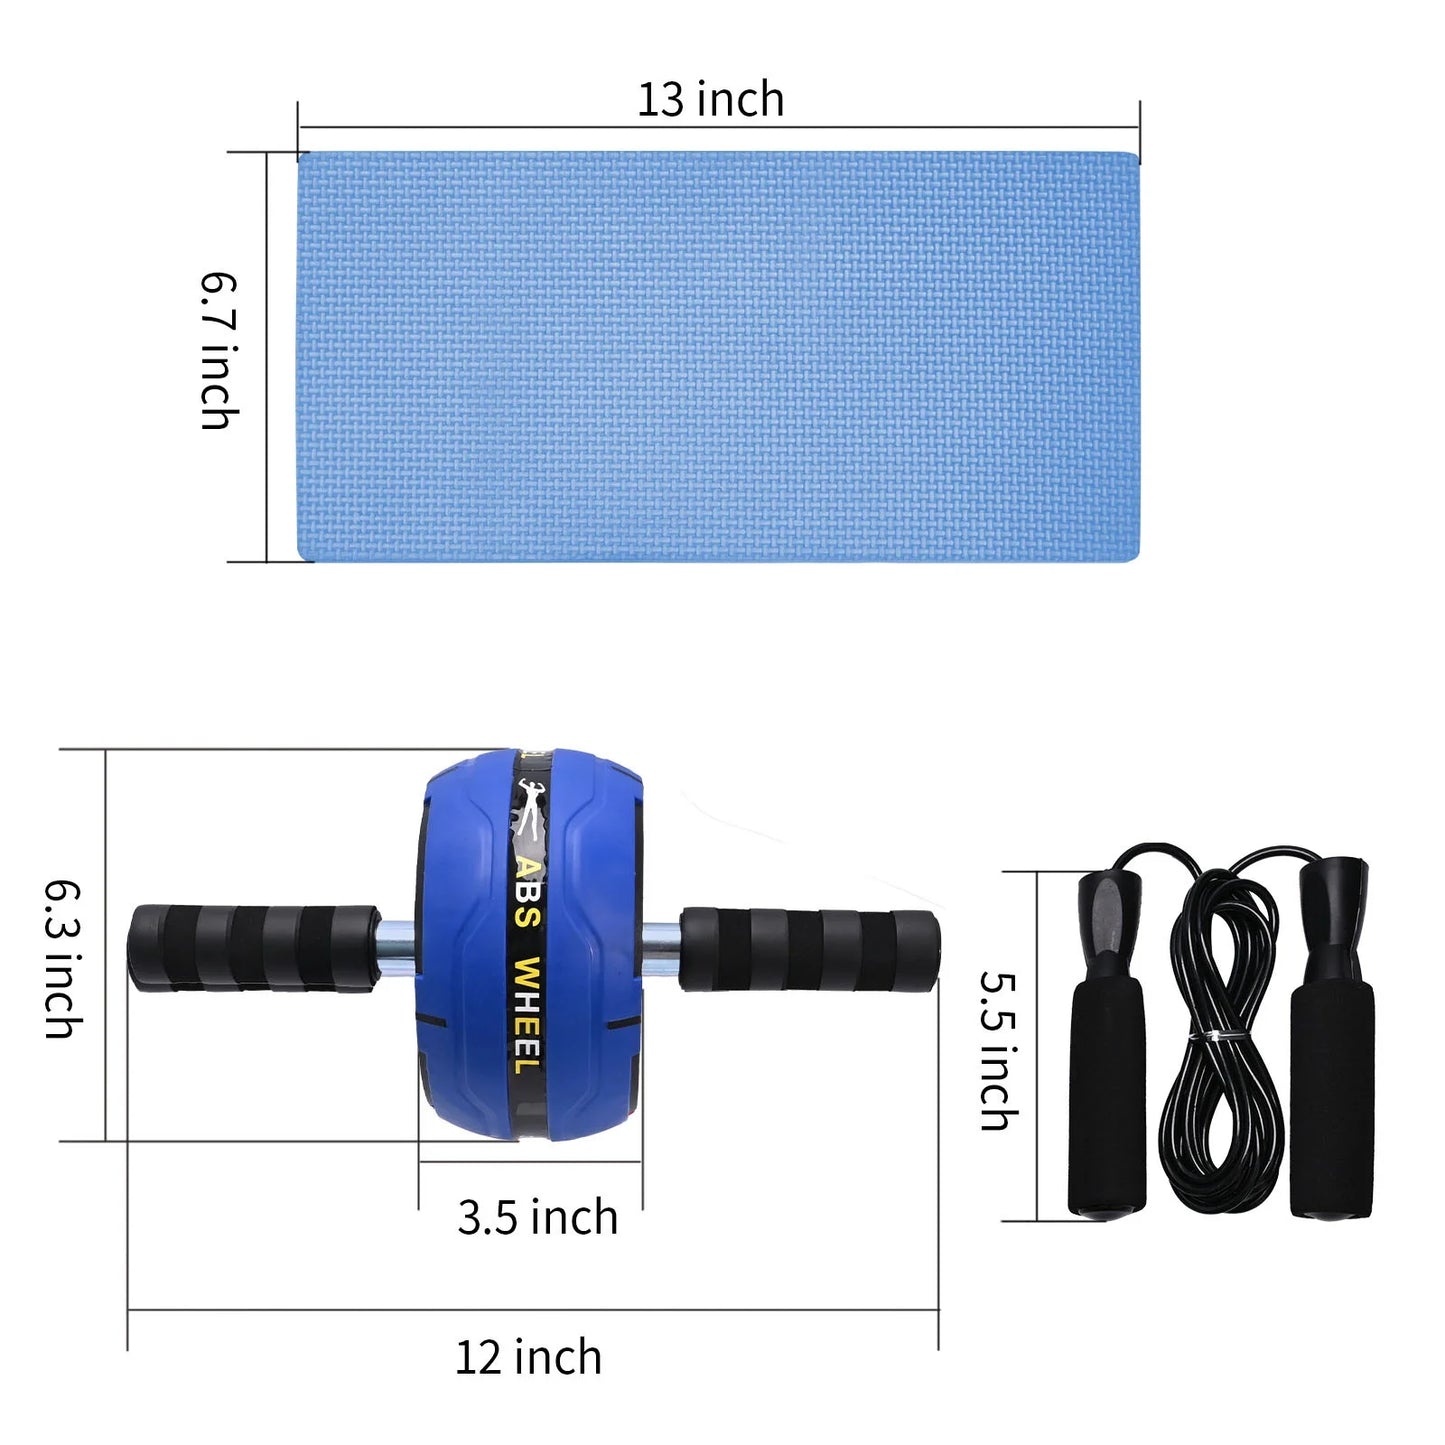 Professional title: "7-In-1 Ab Roller Wheel Kit for Home Gym with Push-Up Bar, Knee Mat, Jump Rope, Hand Gripper - Blue"